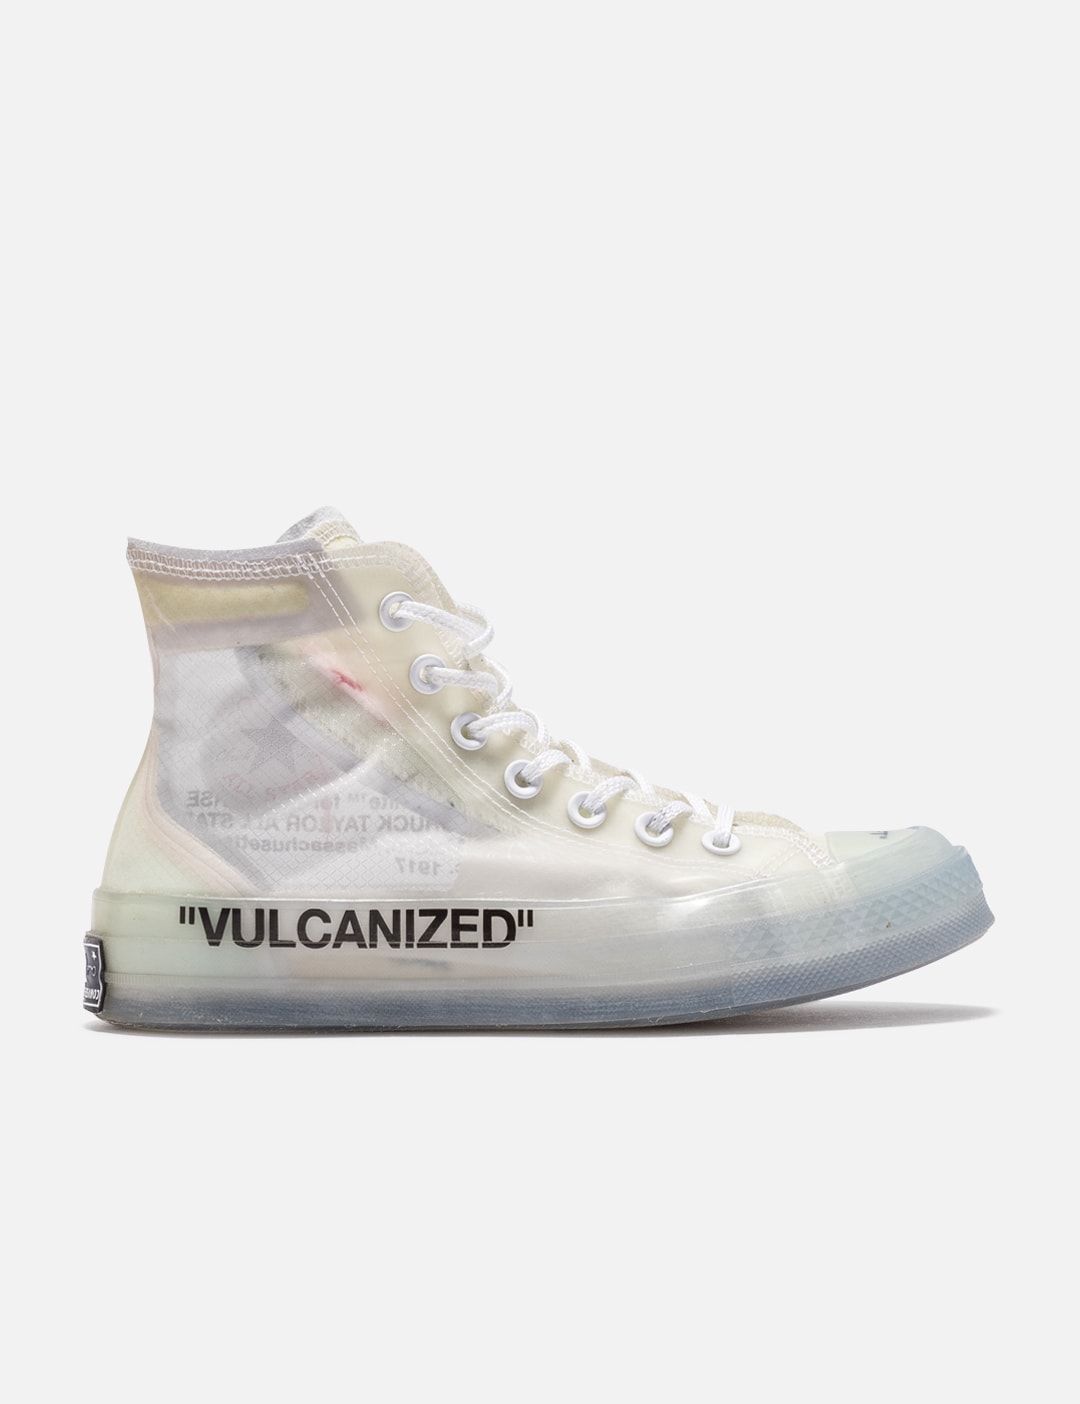 Converse - Off White x Converse Chuck Taylor All-Star High-top Sneakers | HBX - Globally Curated Fashion and Lifestyle by Hypebeast